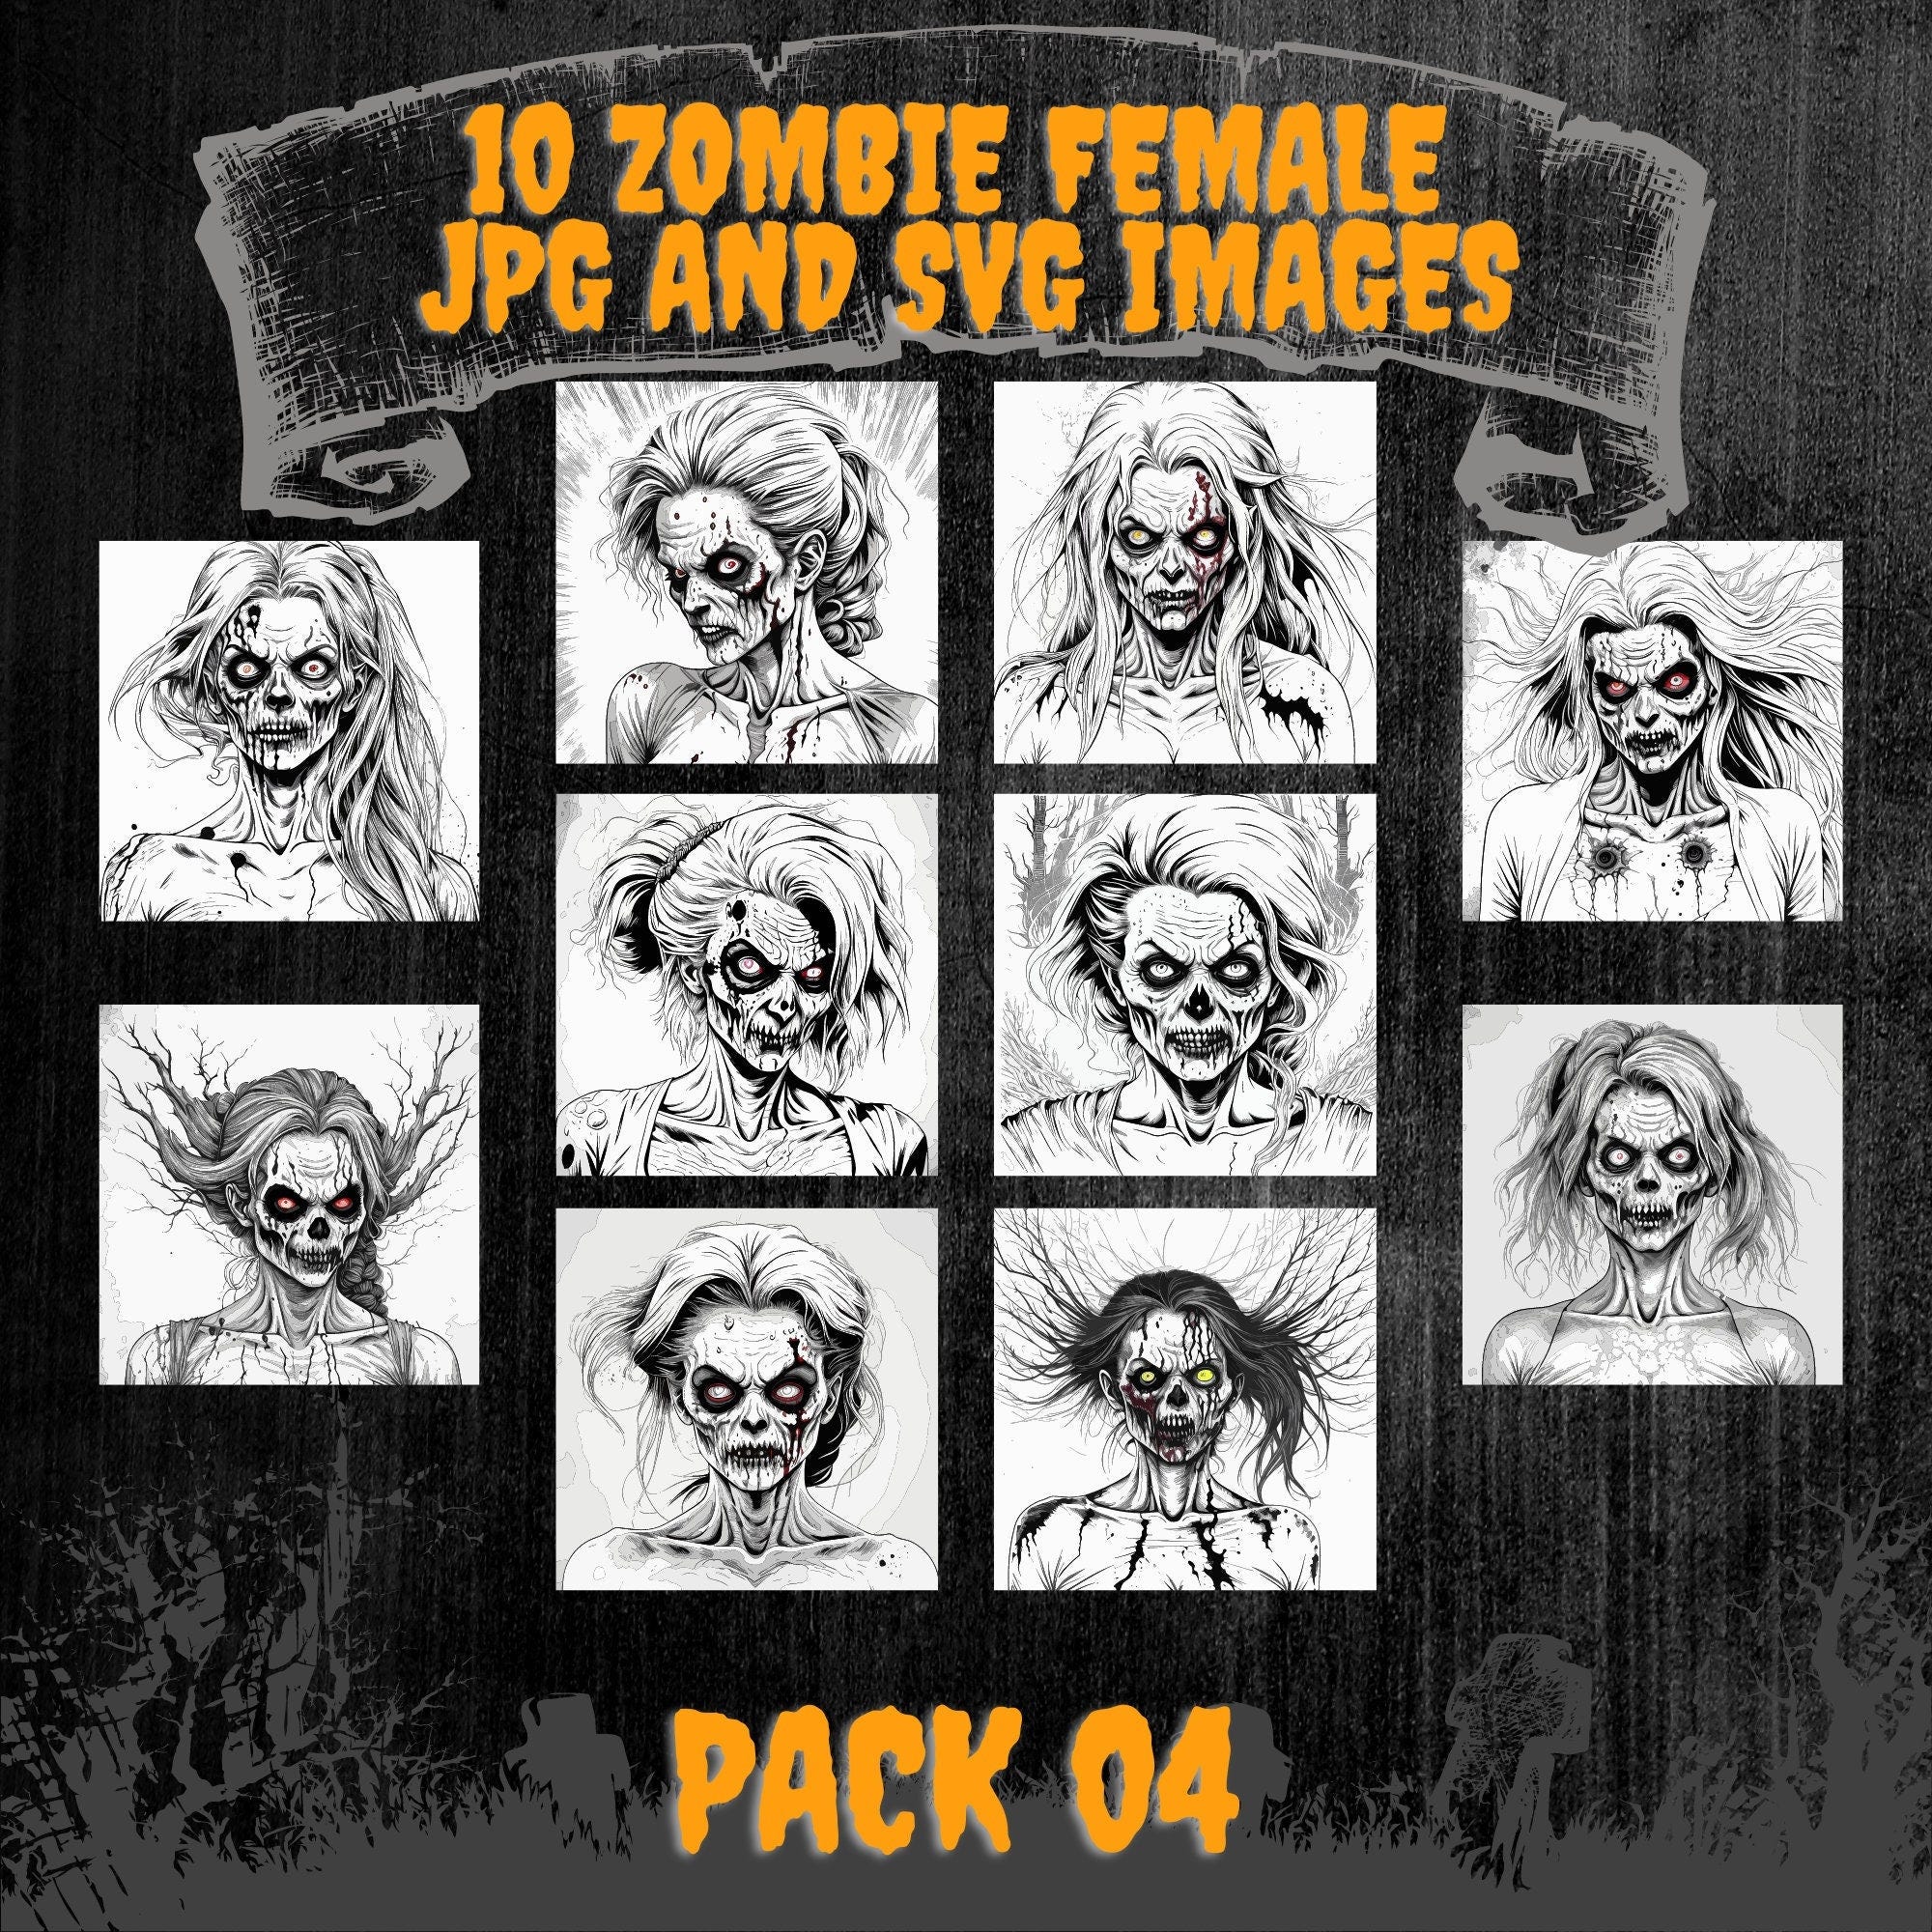 Creepy and Chic: 10 Female Zombie JPG and SVG Digital Files for Your Spooky, Horror Designs - Commercial and Personal Use! - Pack 04!